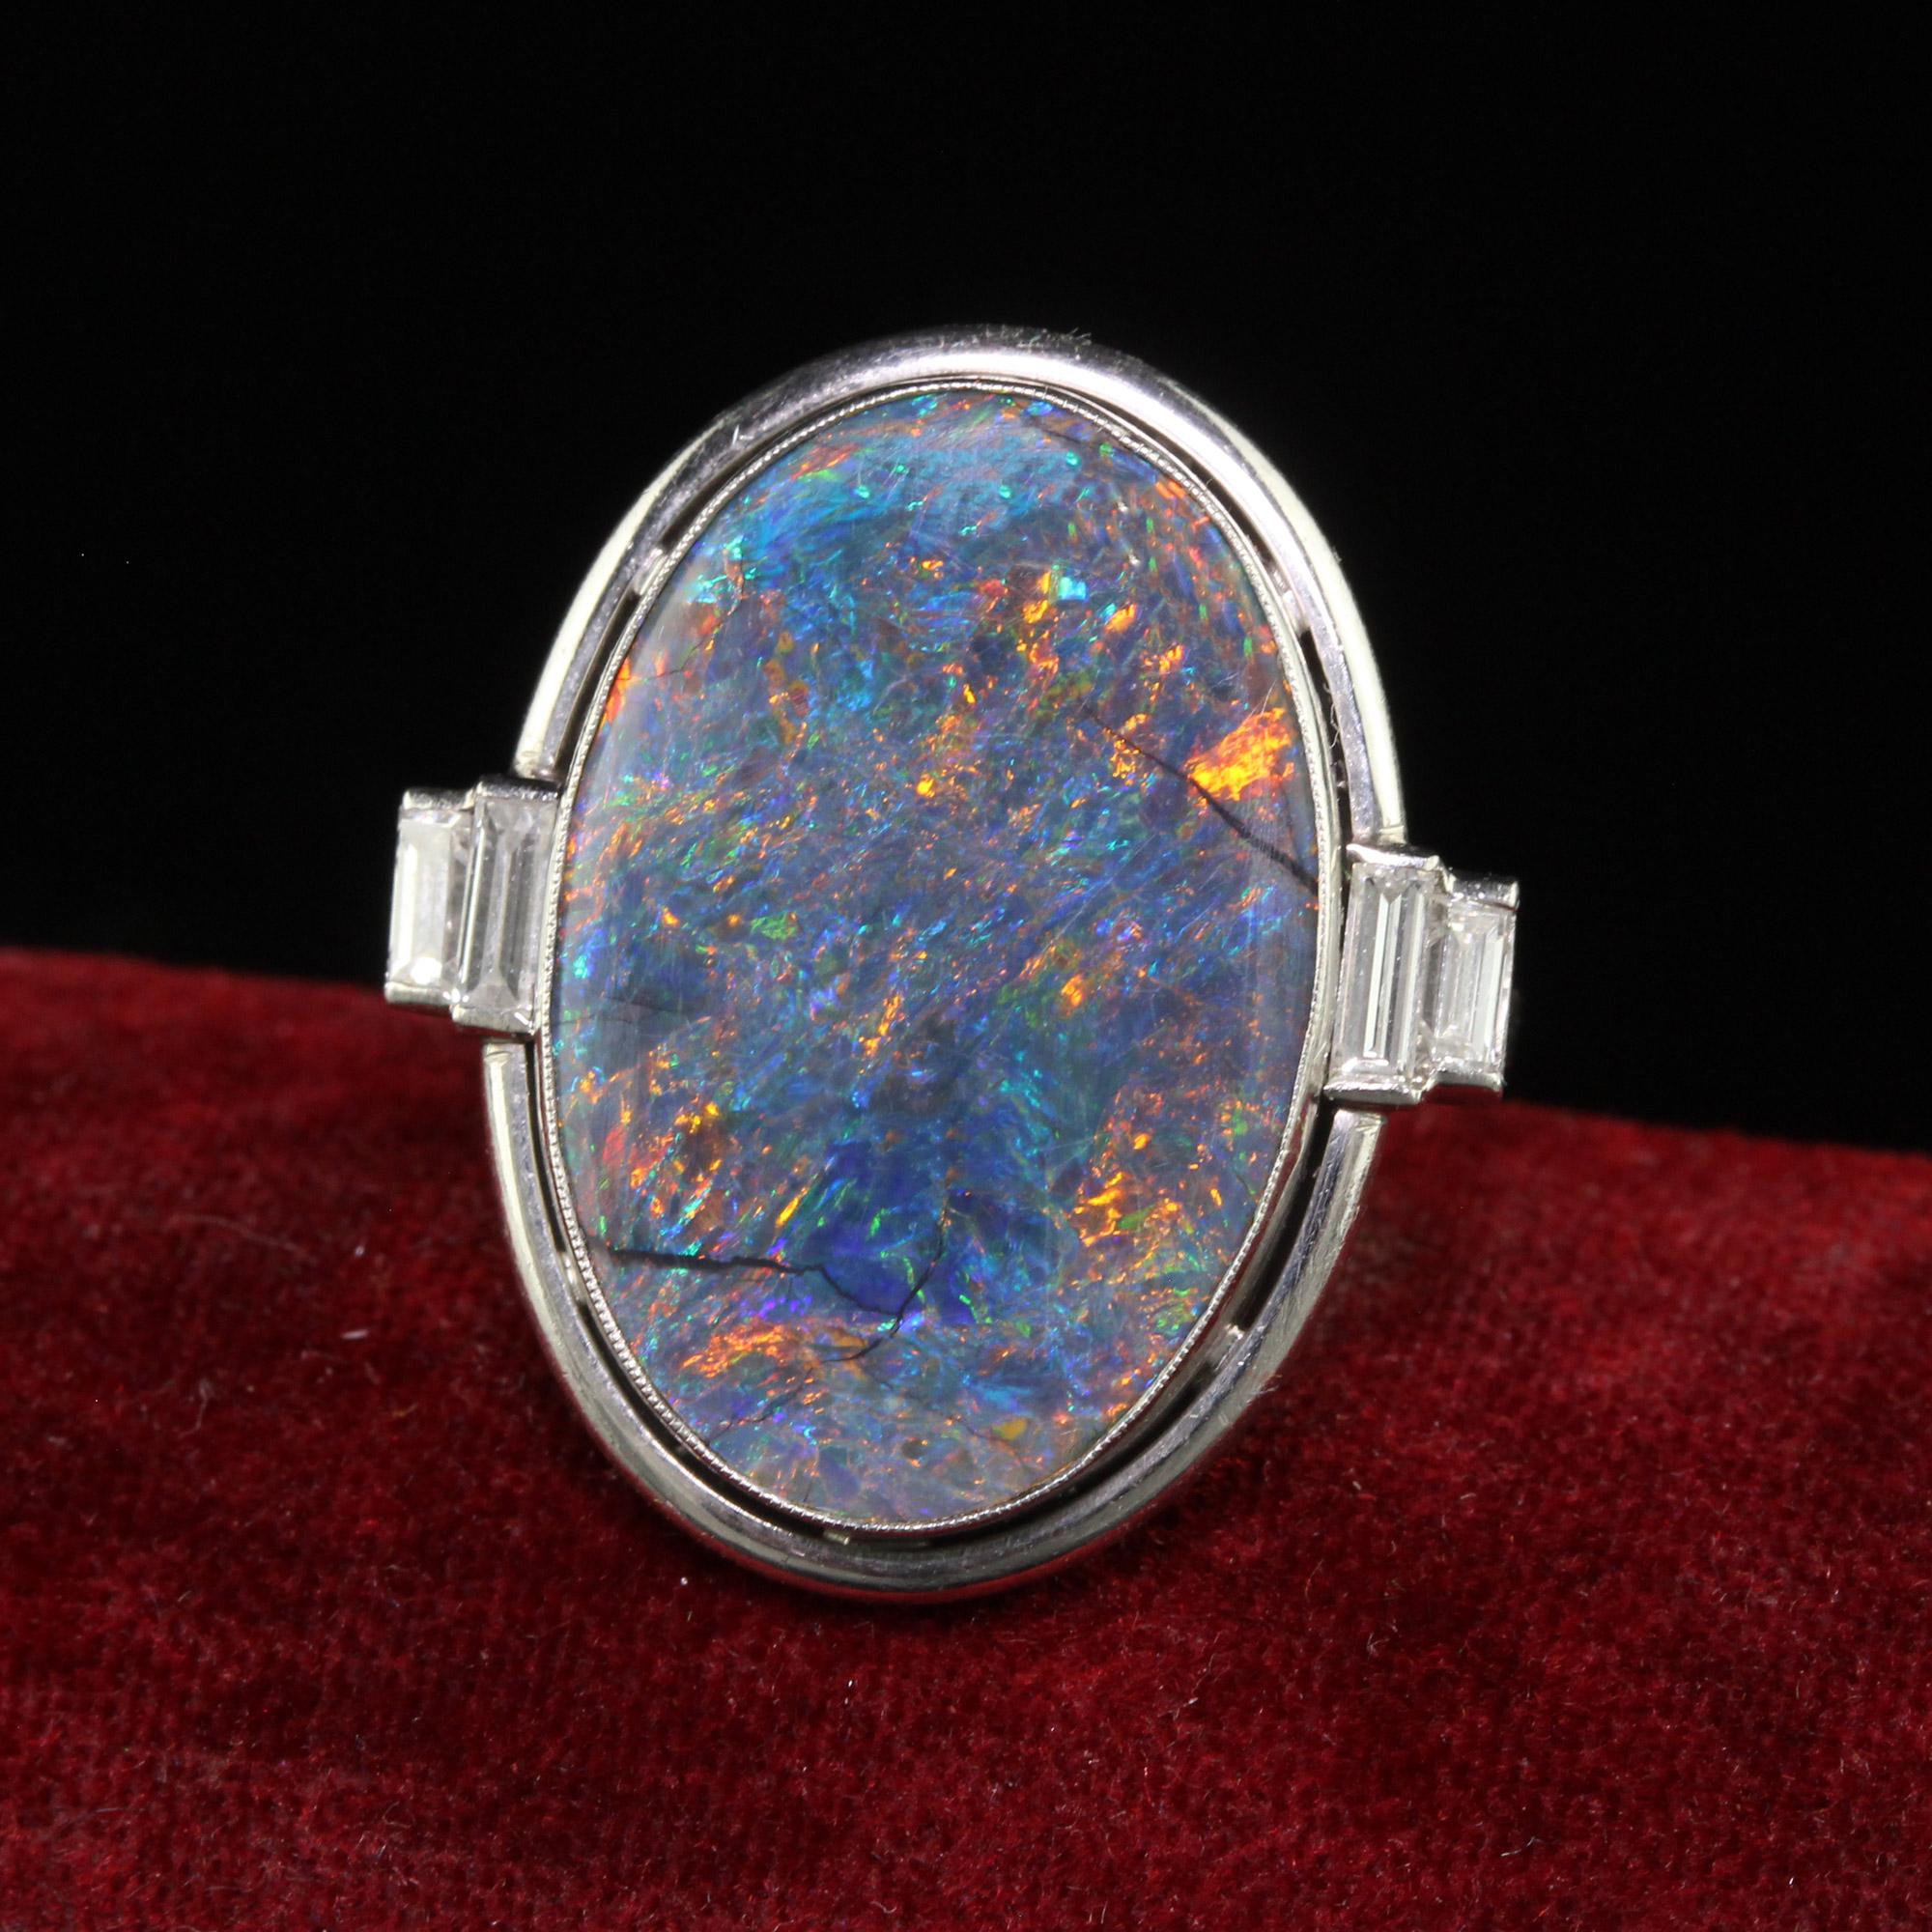 Beautiful Antique Art Deco Platinum Natural Black Opal and Diamond Statement Ring - GIA. This gorgeous art deco black opal ring is crafted in platinum. The center of this gorgeous ring holds a natural black opal that has an incredible array of